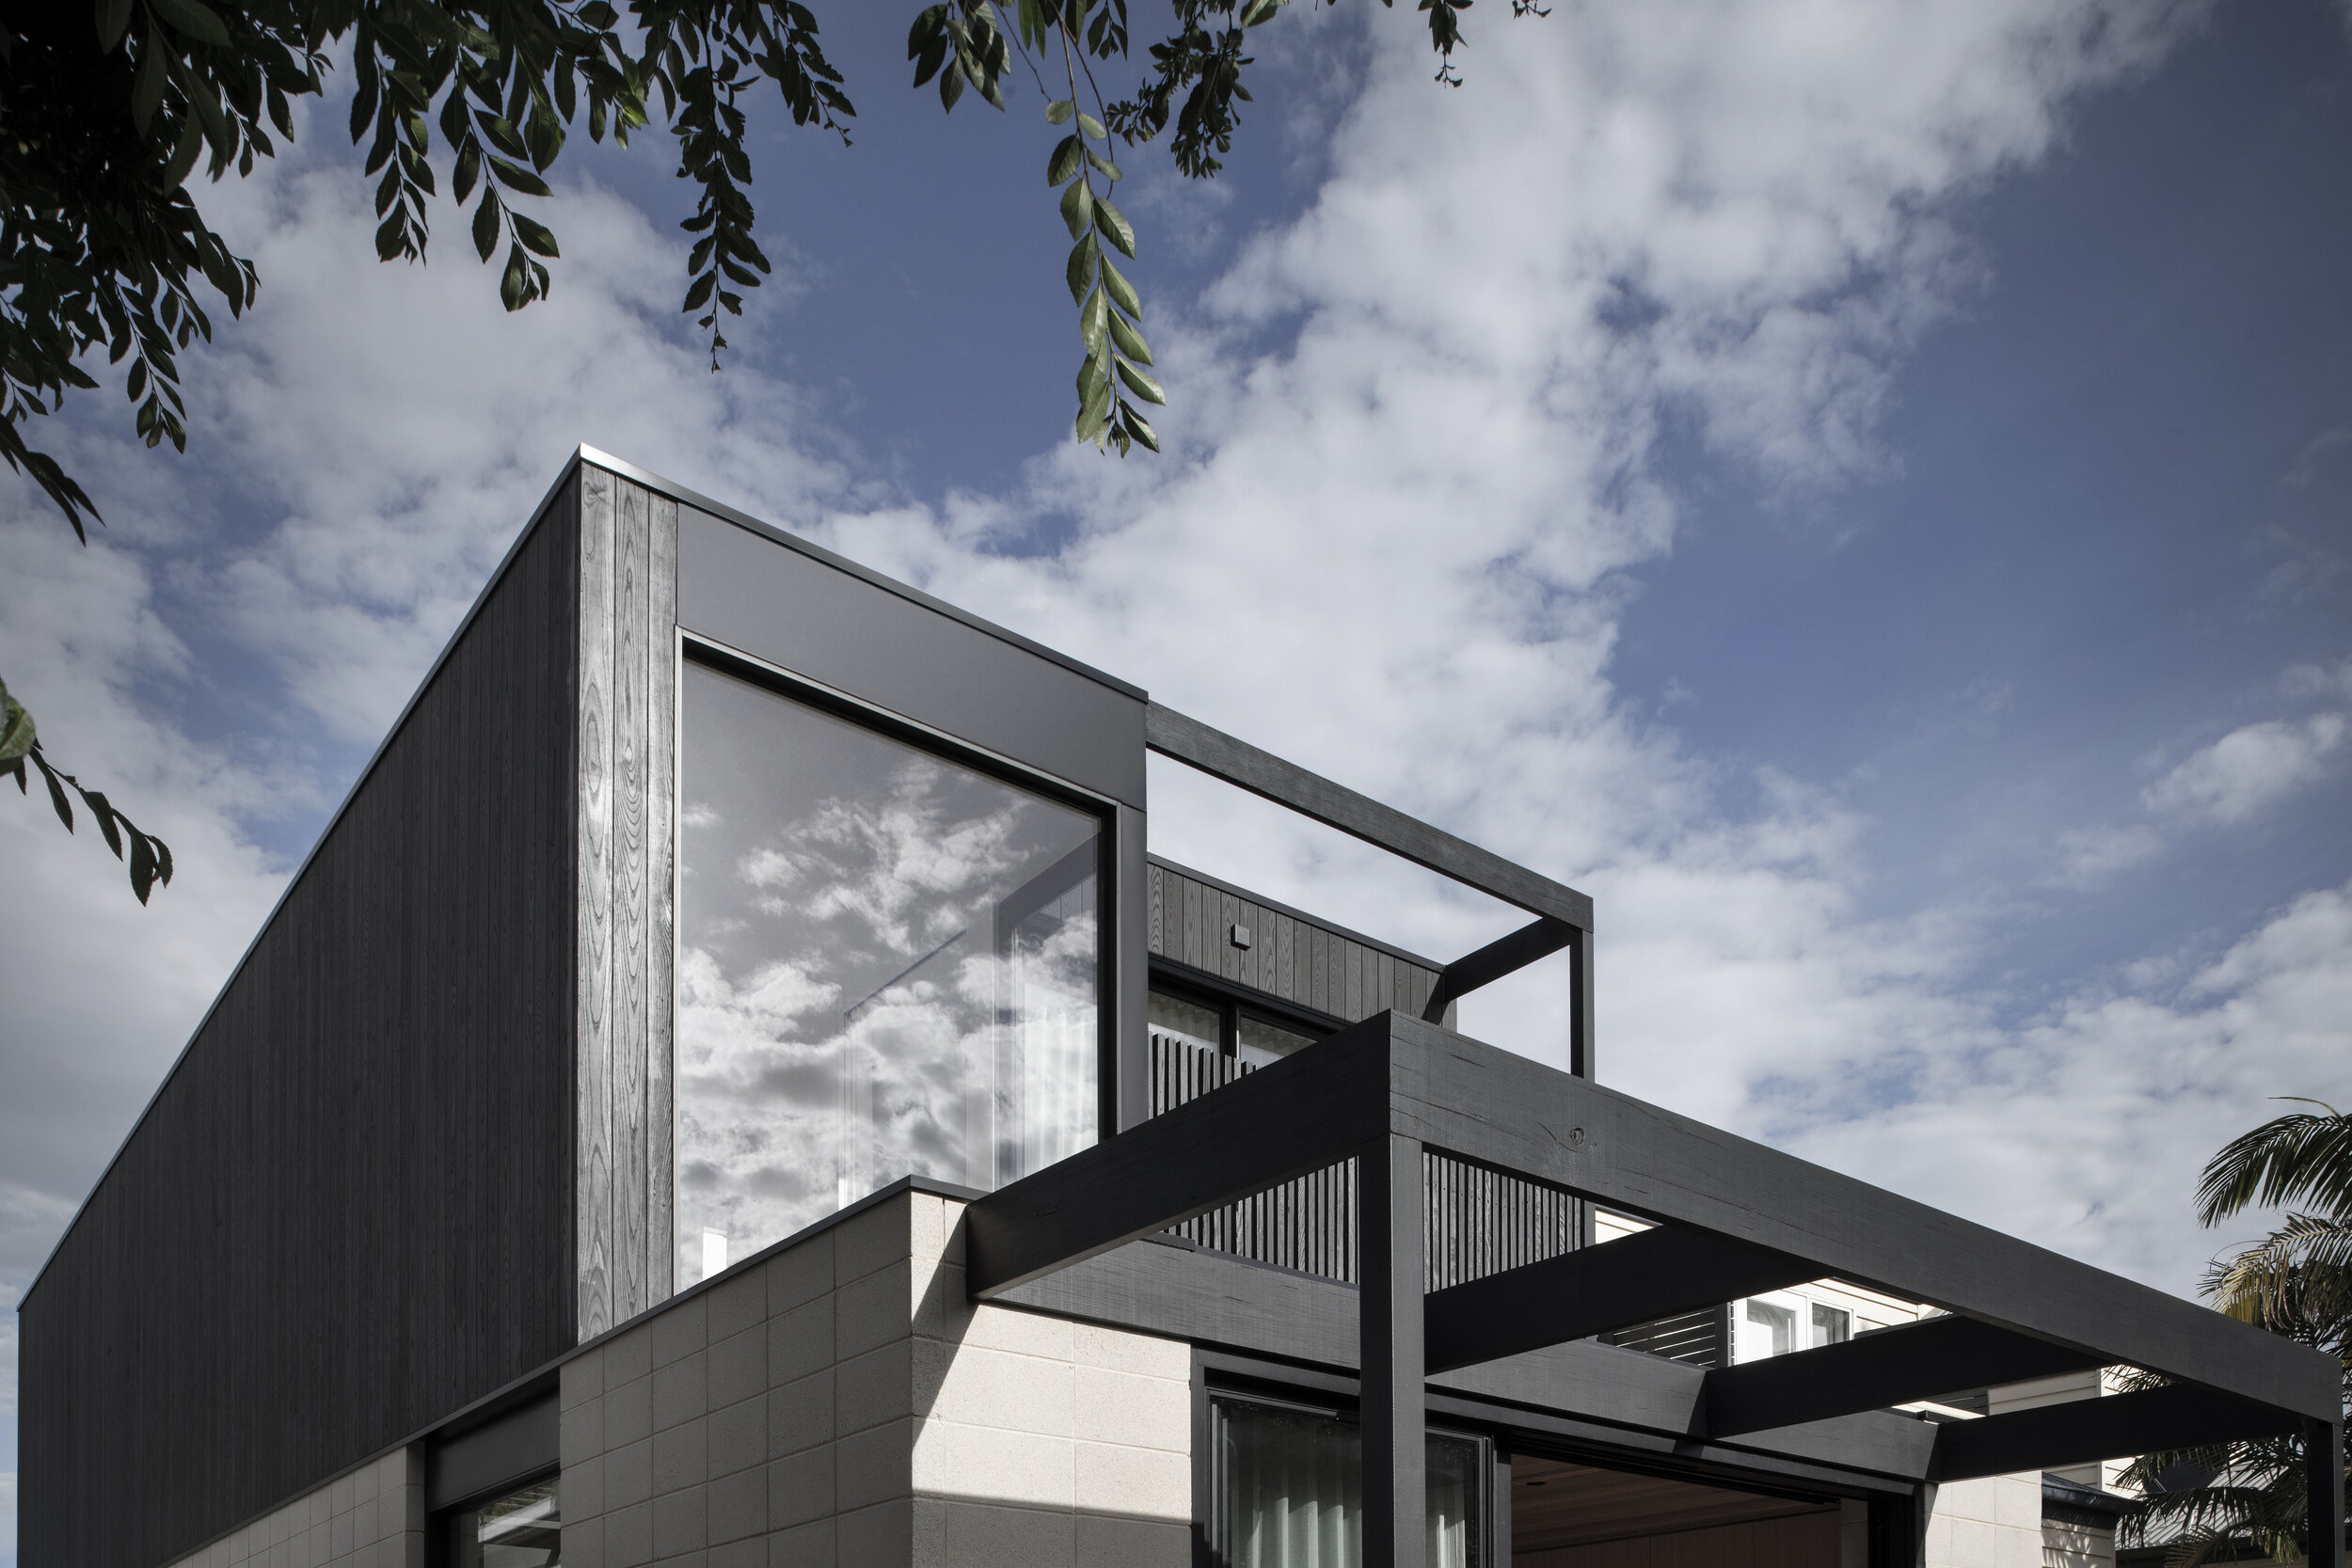 Winter Architecture & Field Office Architecture_Elsternwick House_Nicole England Photography_1.jpg